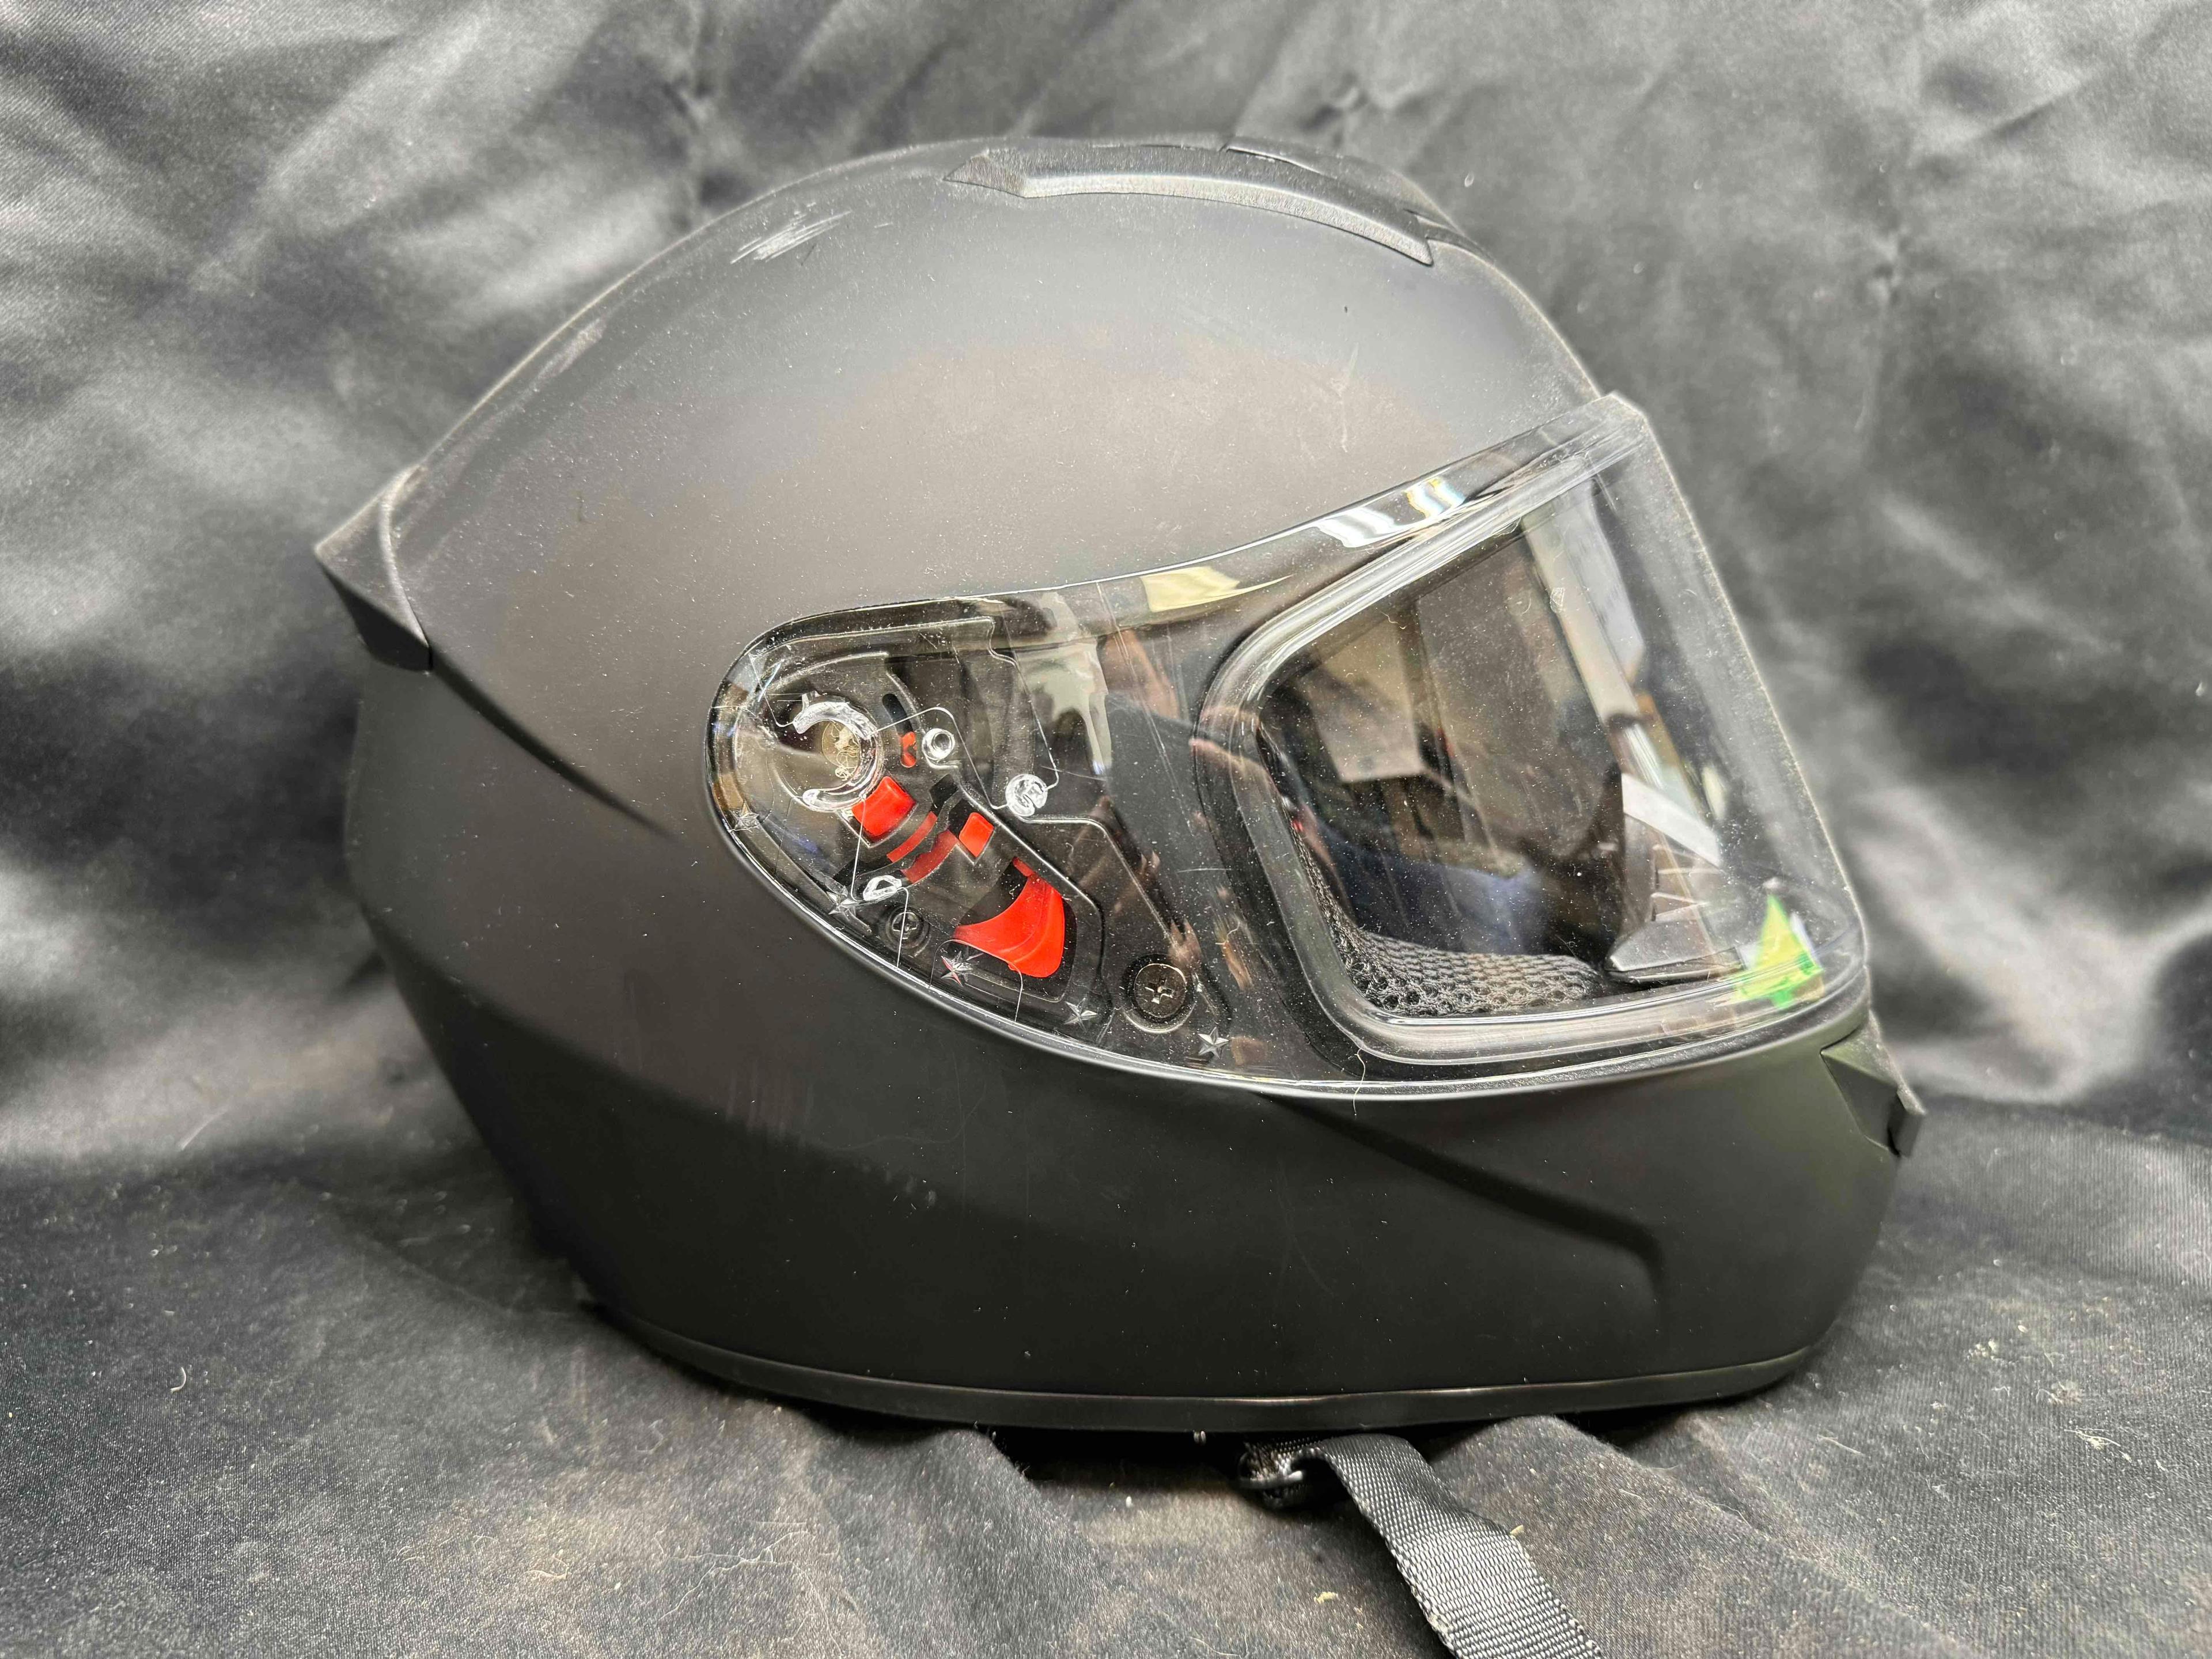 Cool Seven Motorcycle Helmet with Gloves